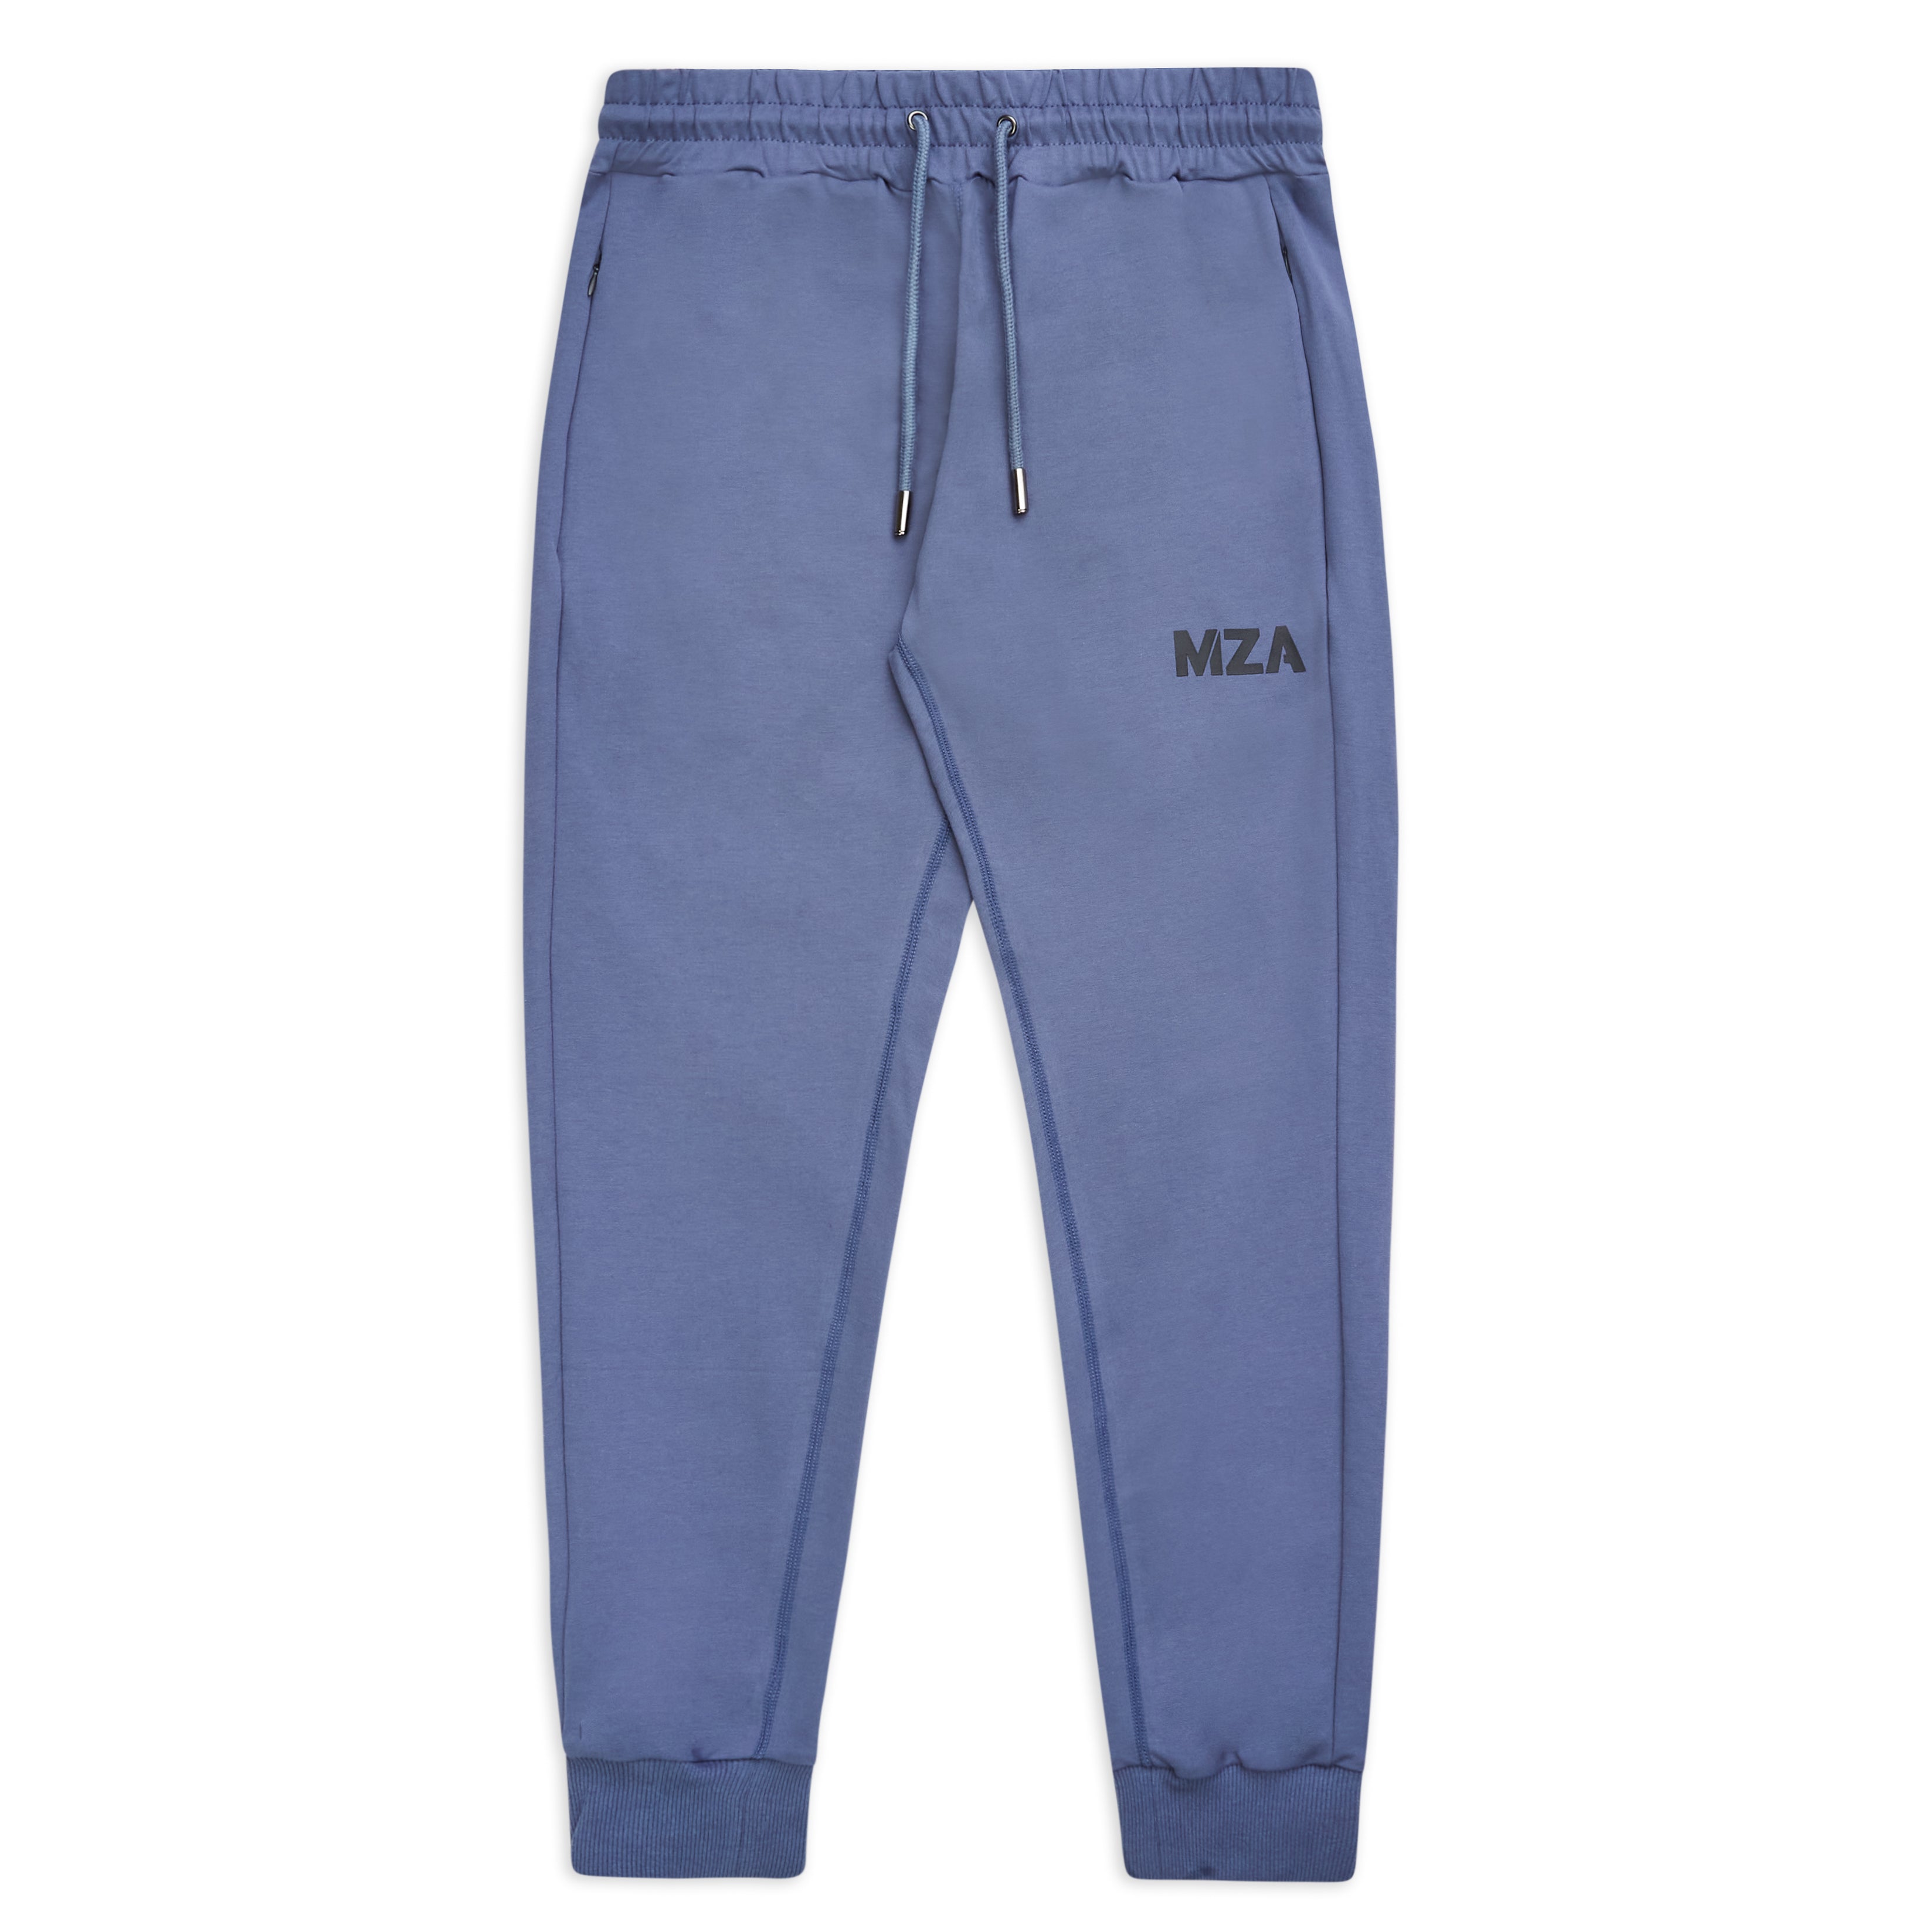 This is a product shot showcasing the new standard joggers in blue steel on a white background.  They feature the MZA logo in black on the front left upper thigh